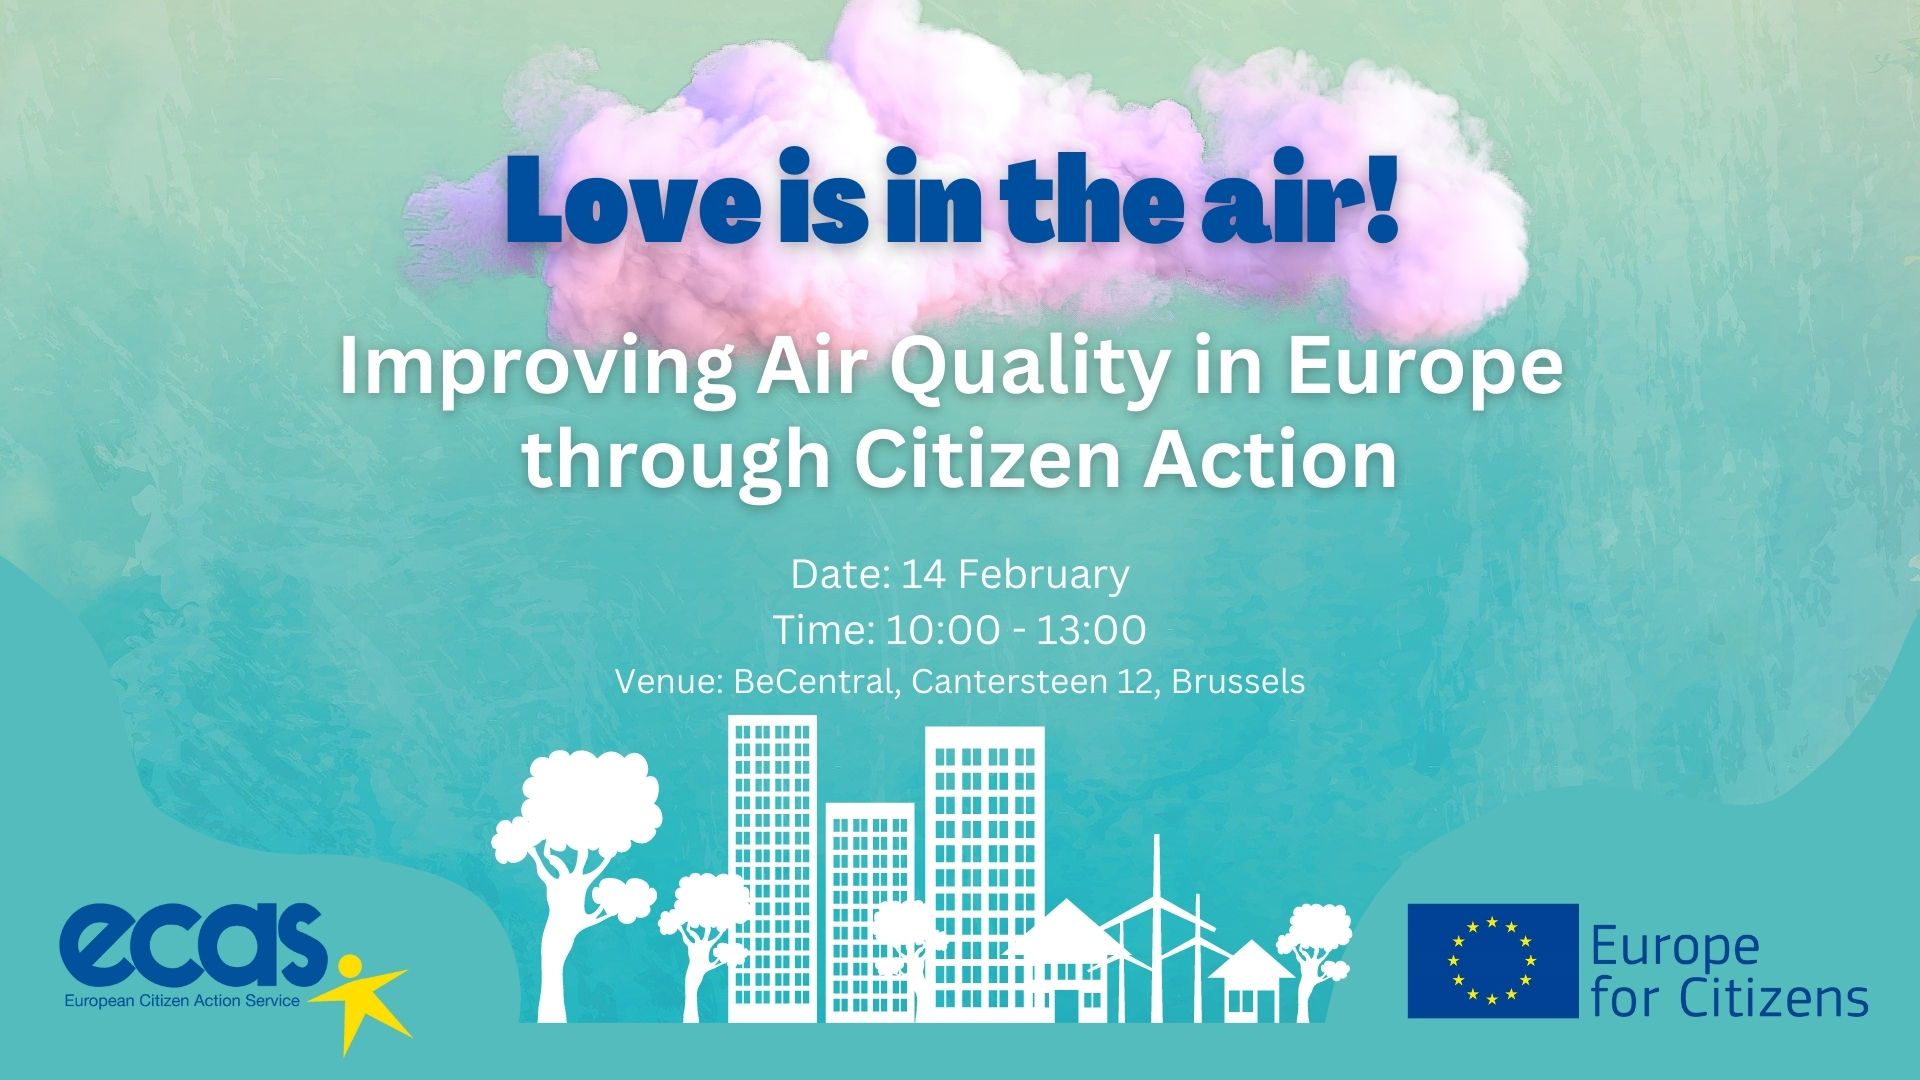 Love is in the air! Improving Air Quality in Europe through Citizen Action